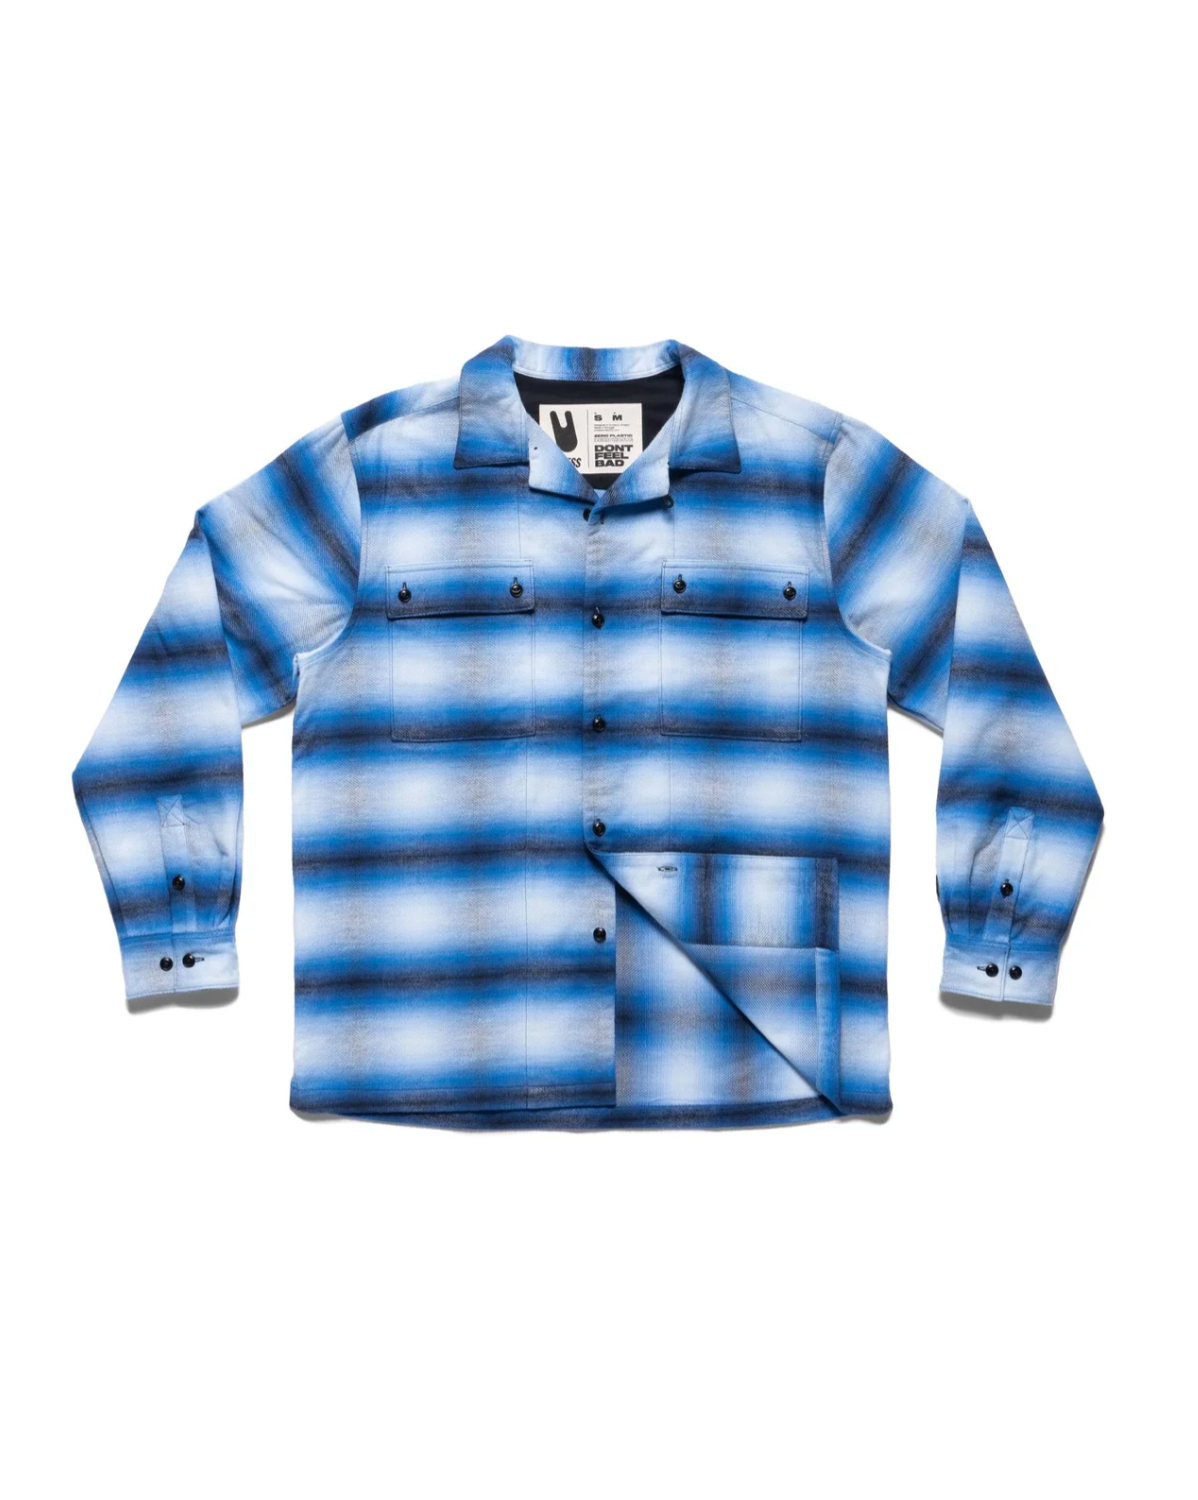 Biodegradable Ombre Flannel Shirt